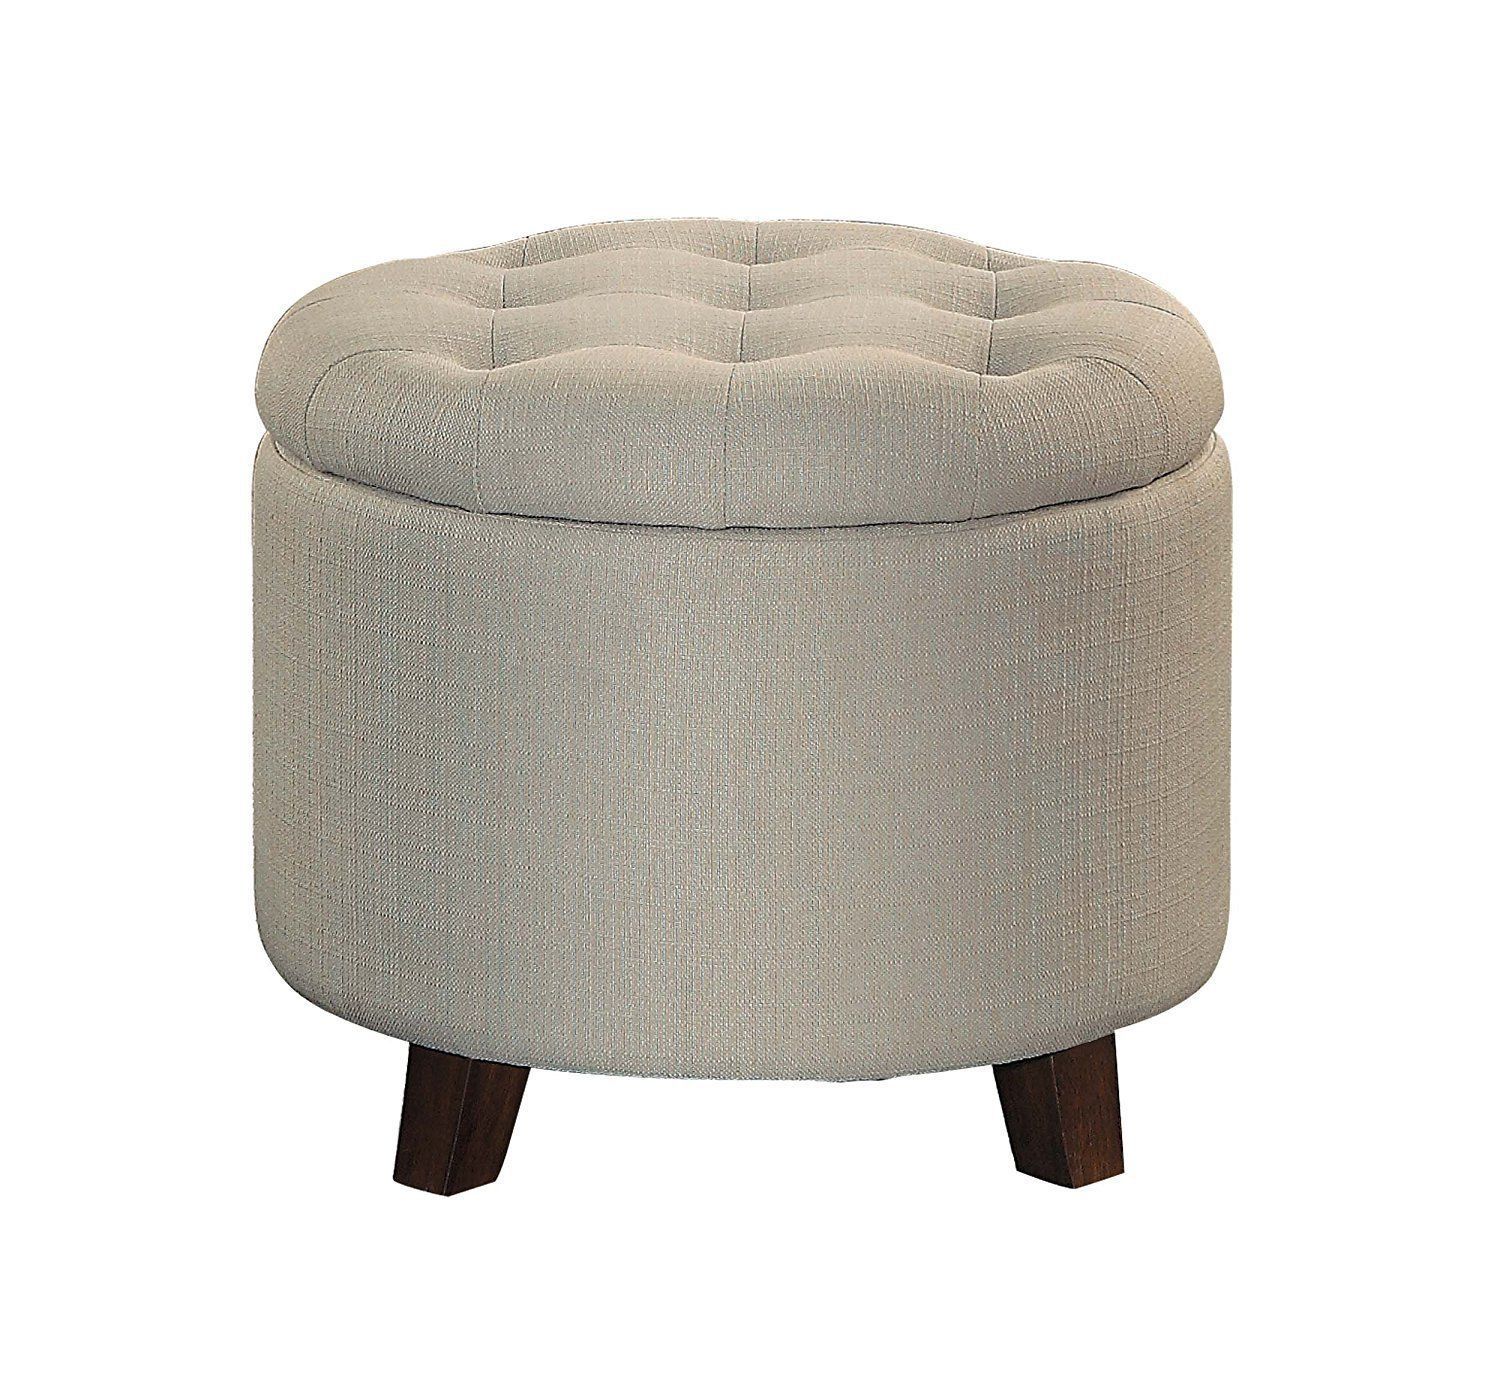 Button Tufted Wooden Round Storage Ottoman Upholstered In Fabric, Beige Pertaining To Brown Fabric Tufted Surfboard Ottomans (Gallery 19 of 20)